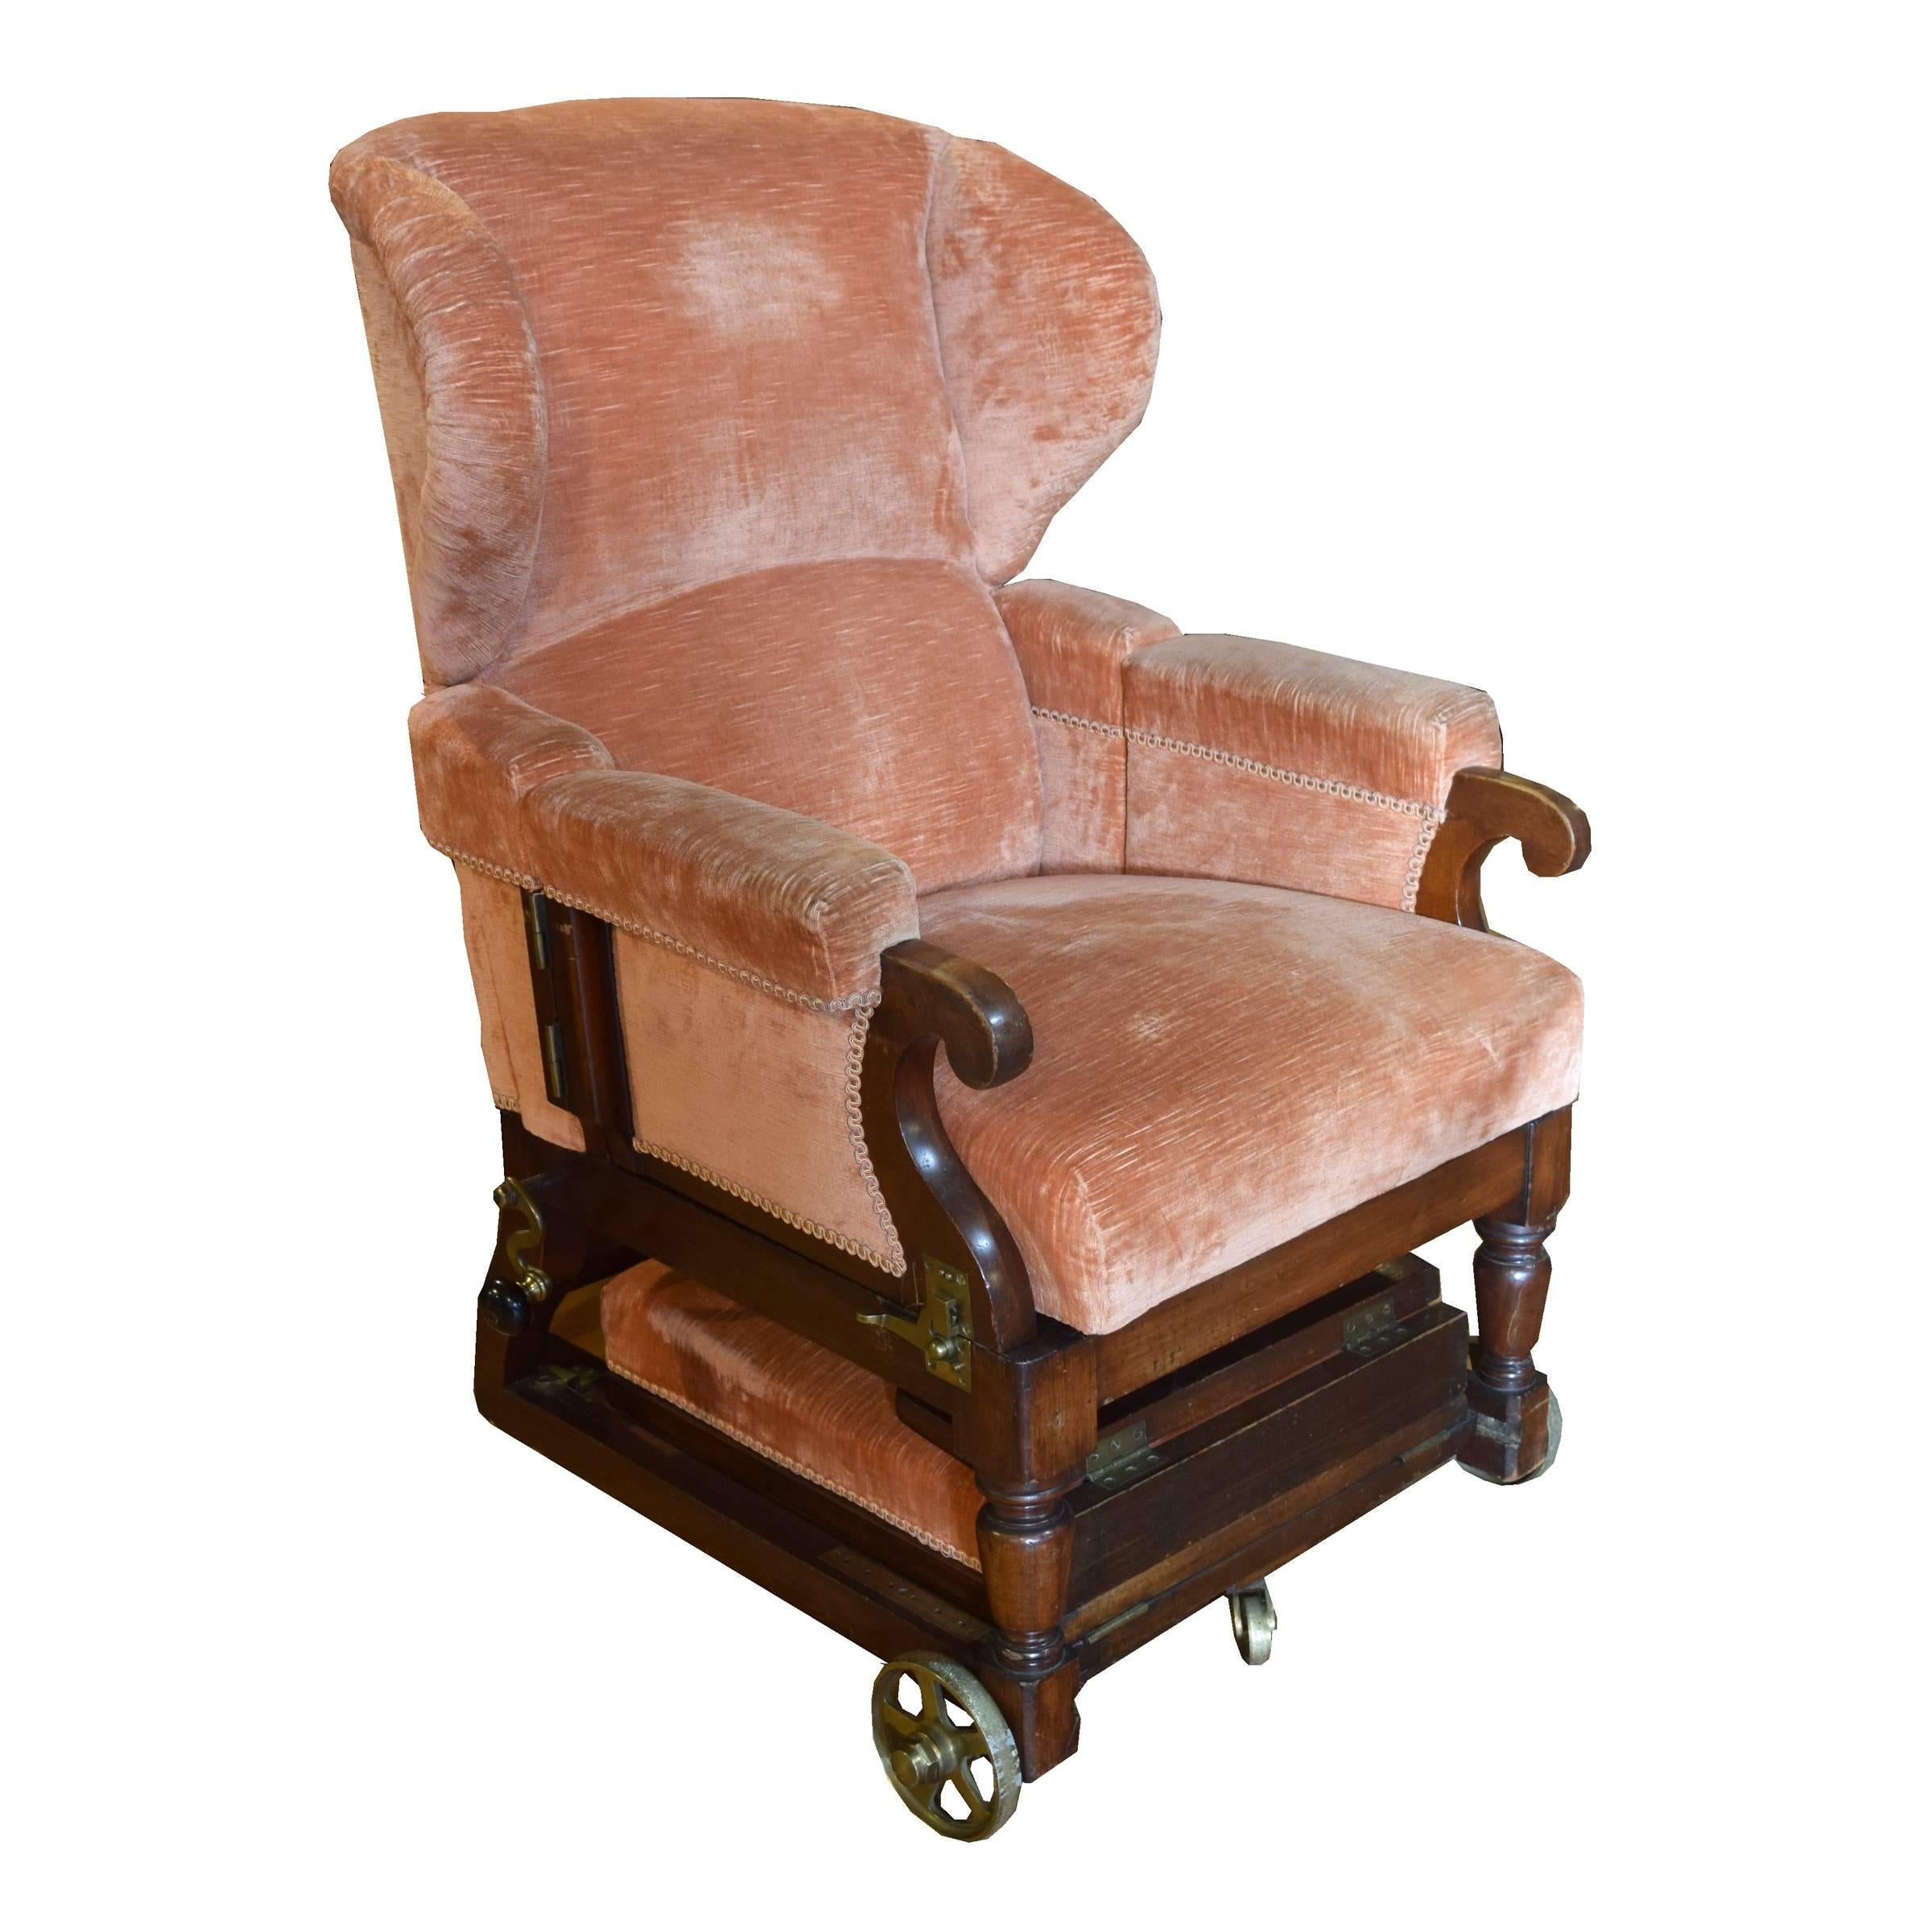 The best quality English adjustable upholstered chair with reclining back, brass wheels, swing out arms and adjustable footrest, late 19th century.
    